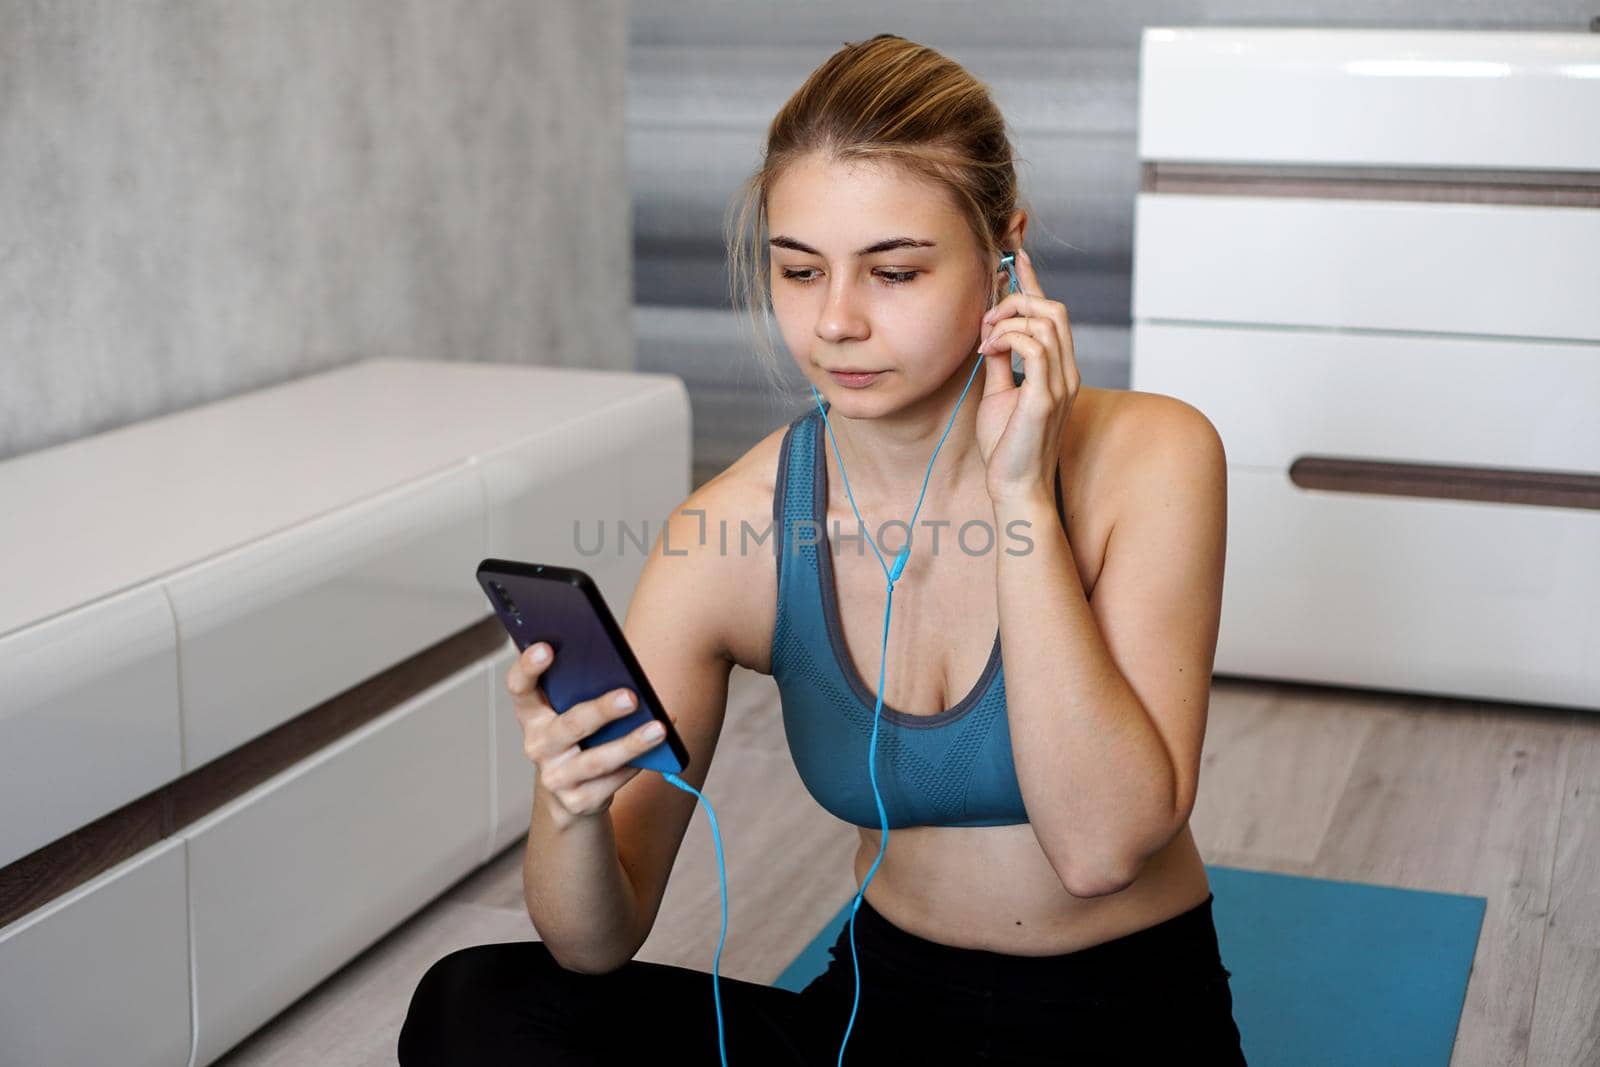 Take sport and add music. Female athlete with earphones enjoying the music playing and touching a screen of her phone while sitting on the floor.